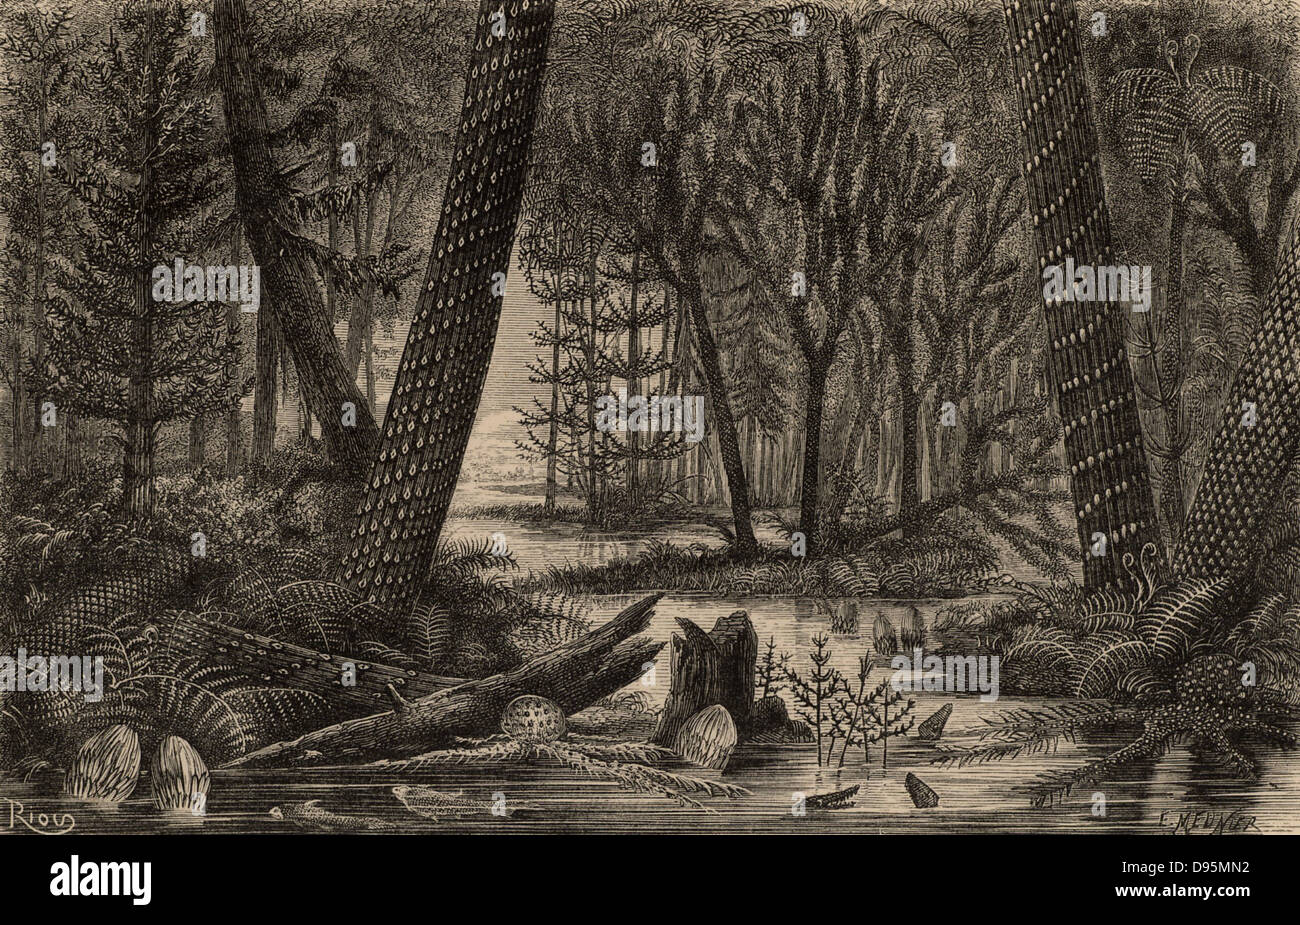 Artist's reconstruction of a carboniferous forest during the time when coal deposits were being laid down.  From 'The Universe' by FA Pouchet (London, 1874). Engraving. Stock Photo